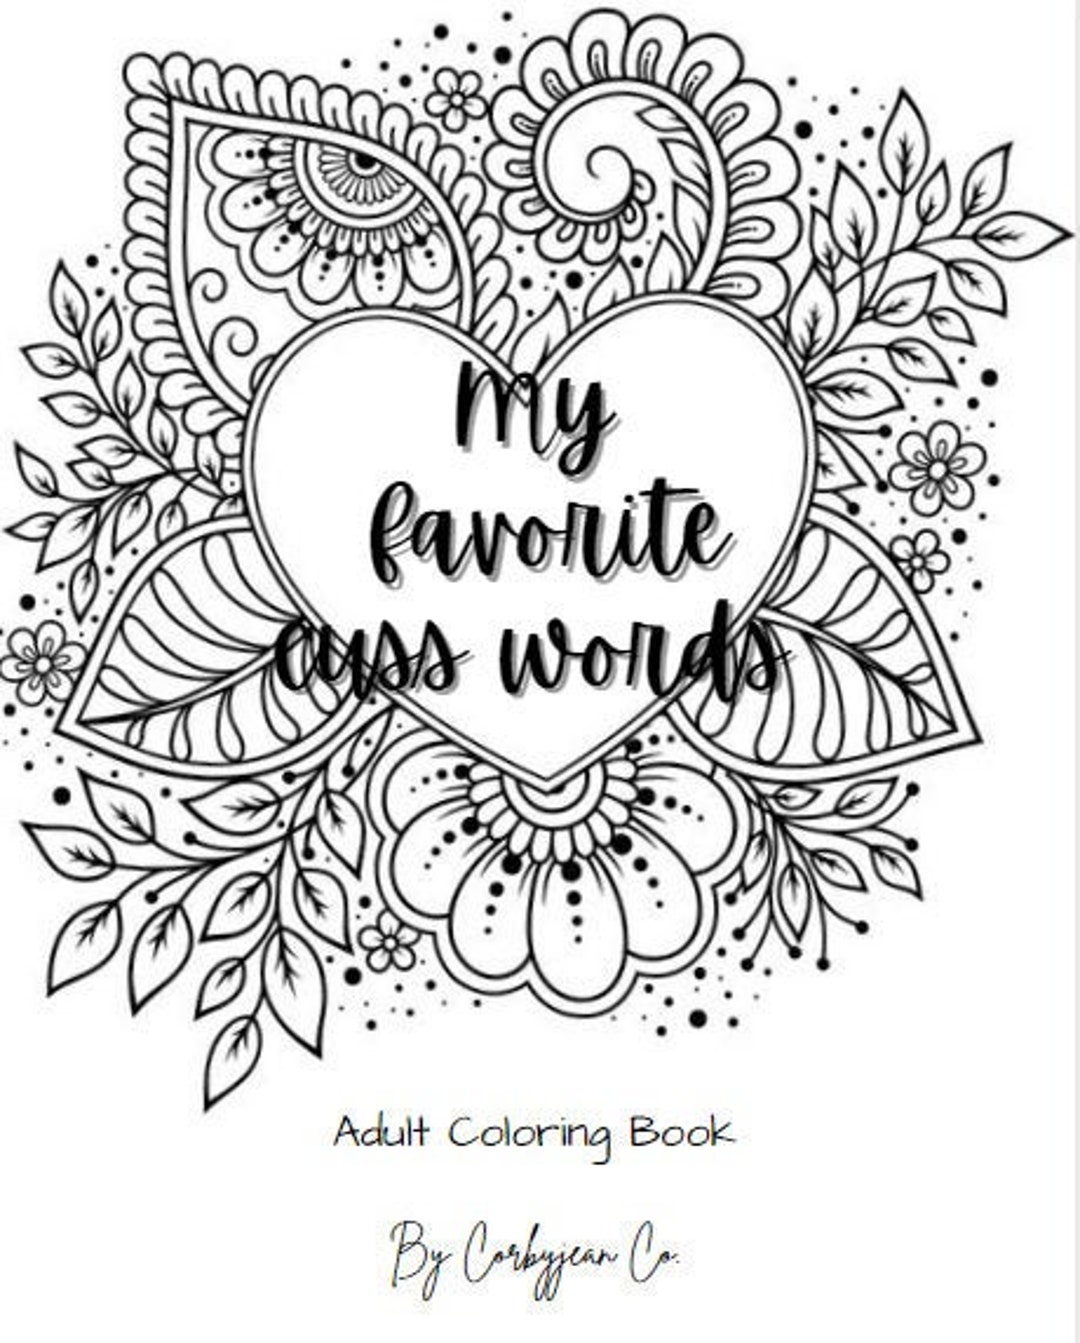 Stream *DOWNLOAD$$ 📚 Mythographic Coloring Book - Adult Coloring Coloring  Book, 8.25 inches by 8.25 inche by HuxleyNavarro